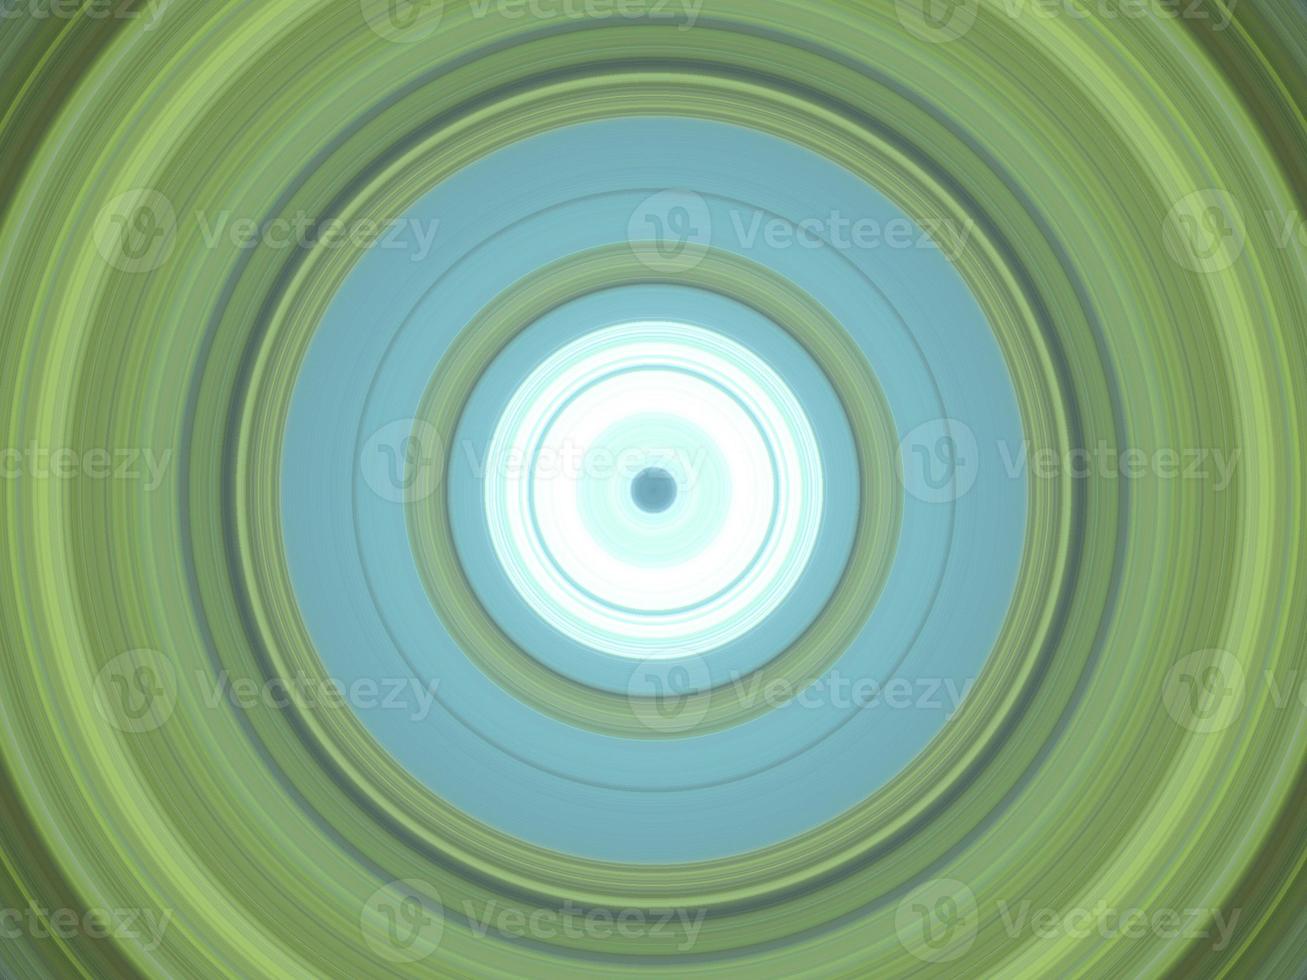 Concentric Circles green and light blue photo